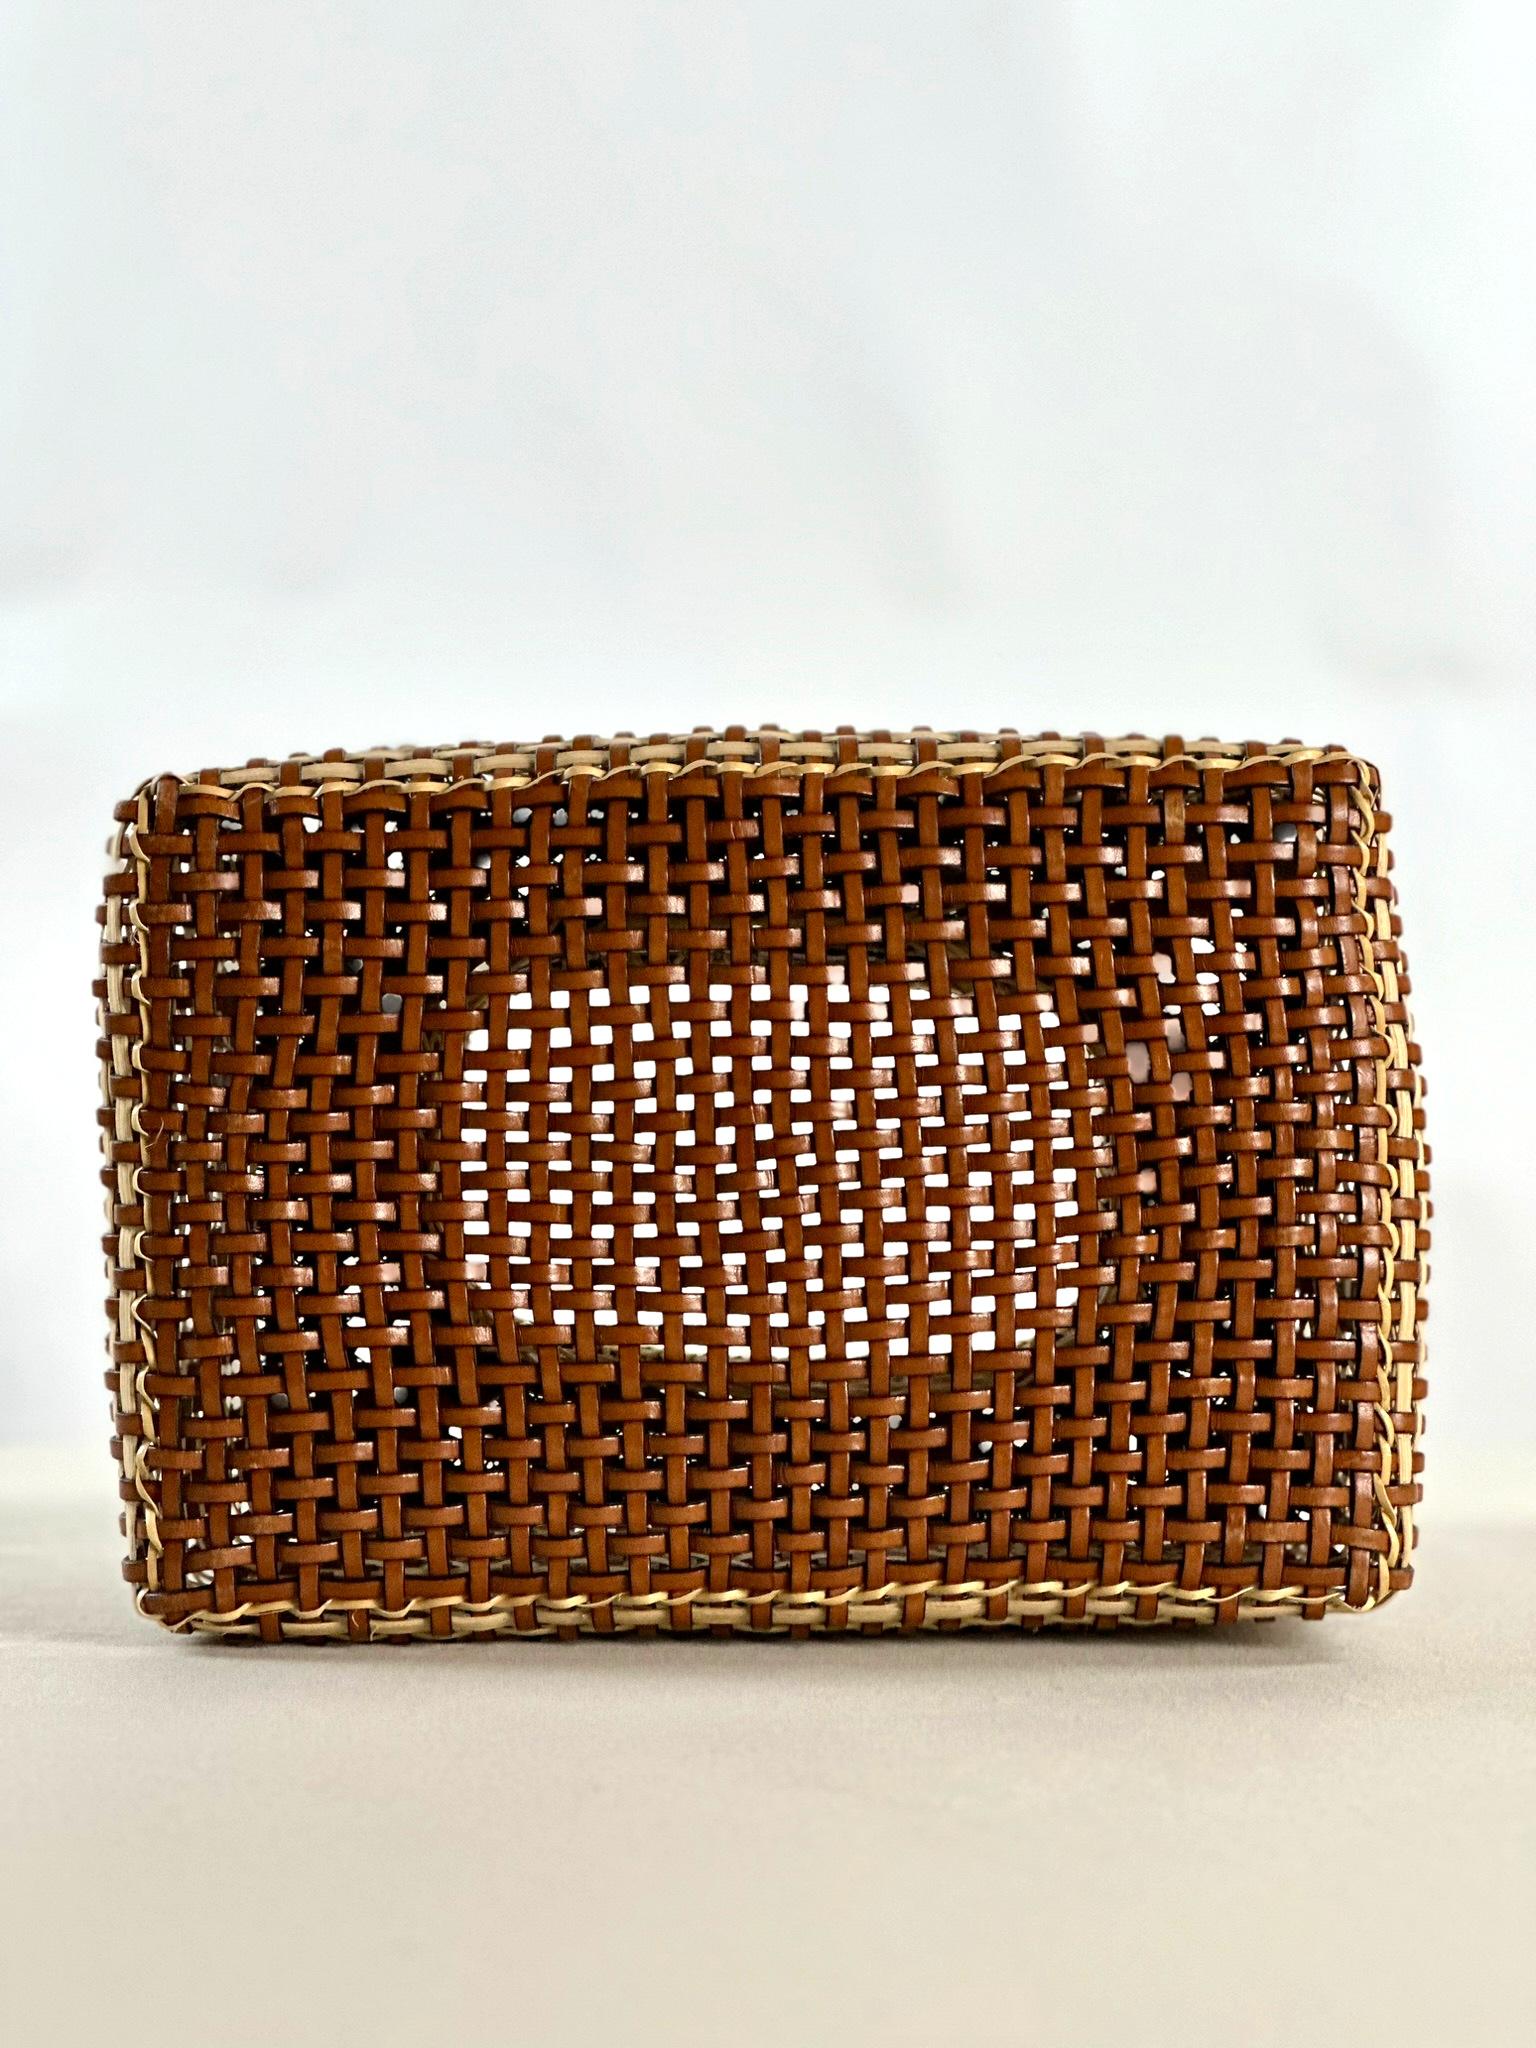 Contemporary Japanese Ikebana Inspired Leather & Cane Handmade Basket Cognac Off White Color For Sale